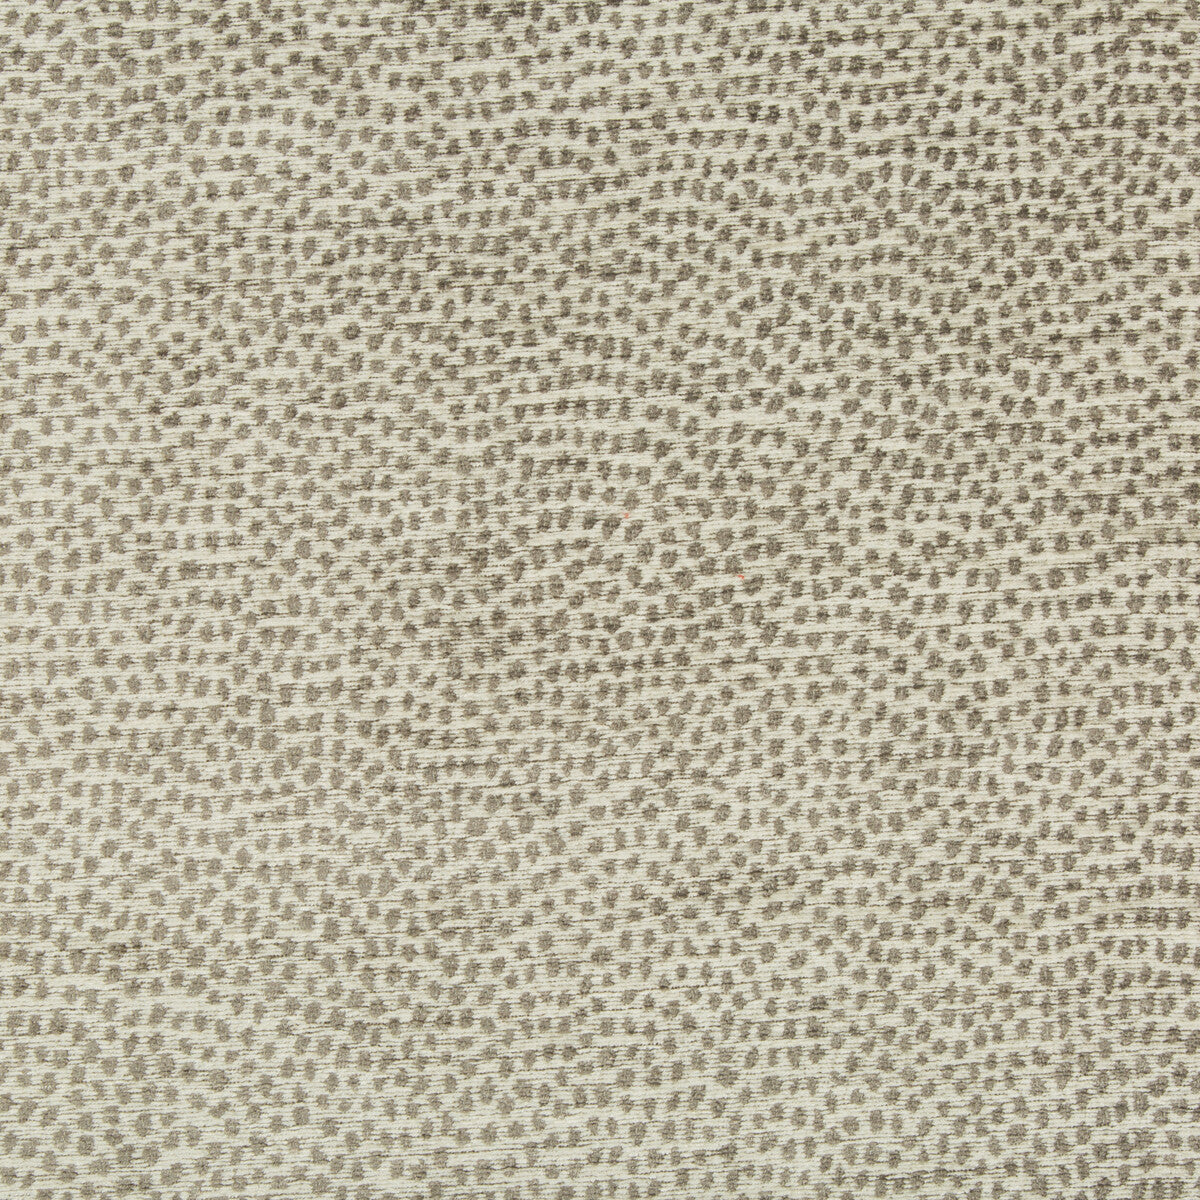 Kravet Design fabric in 34971-11 color - pattern 34971.11.0 - by Kravet Design in the Performance Crypton Home collection